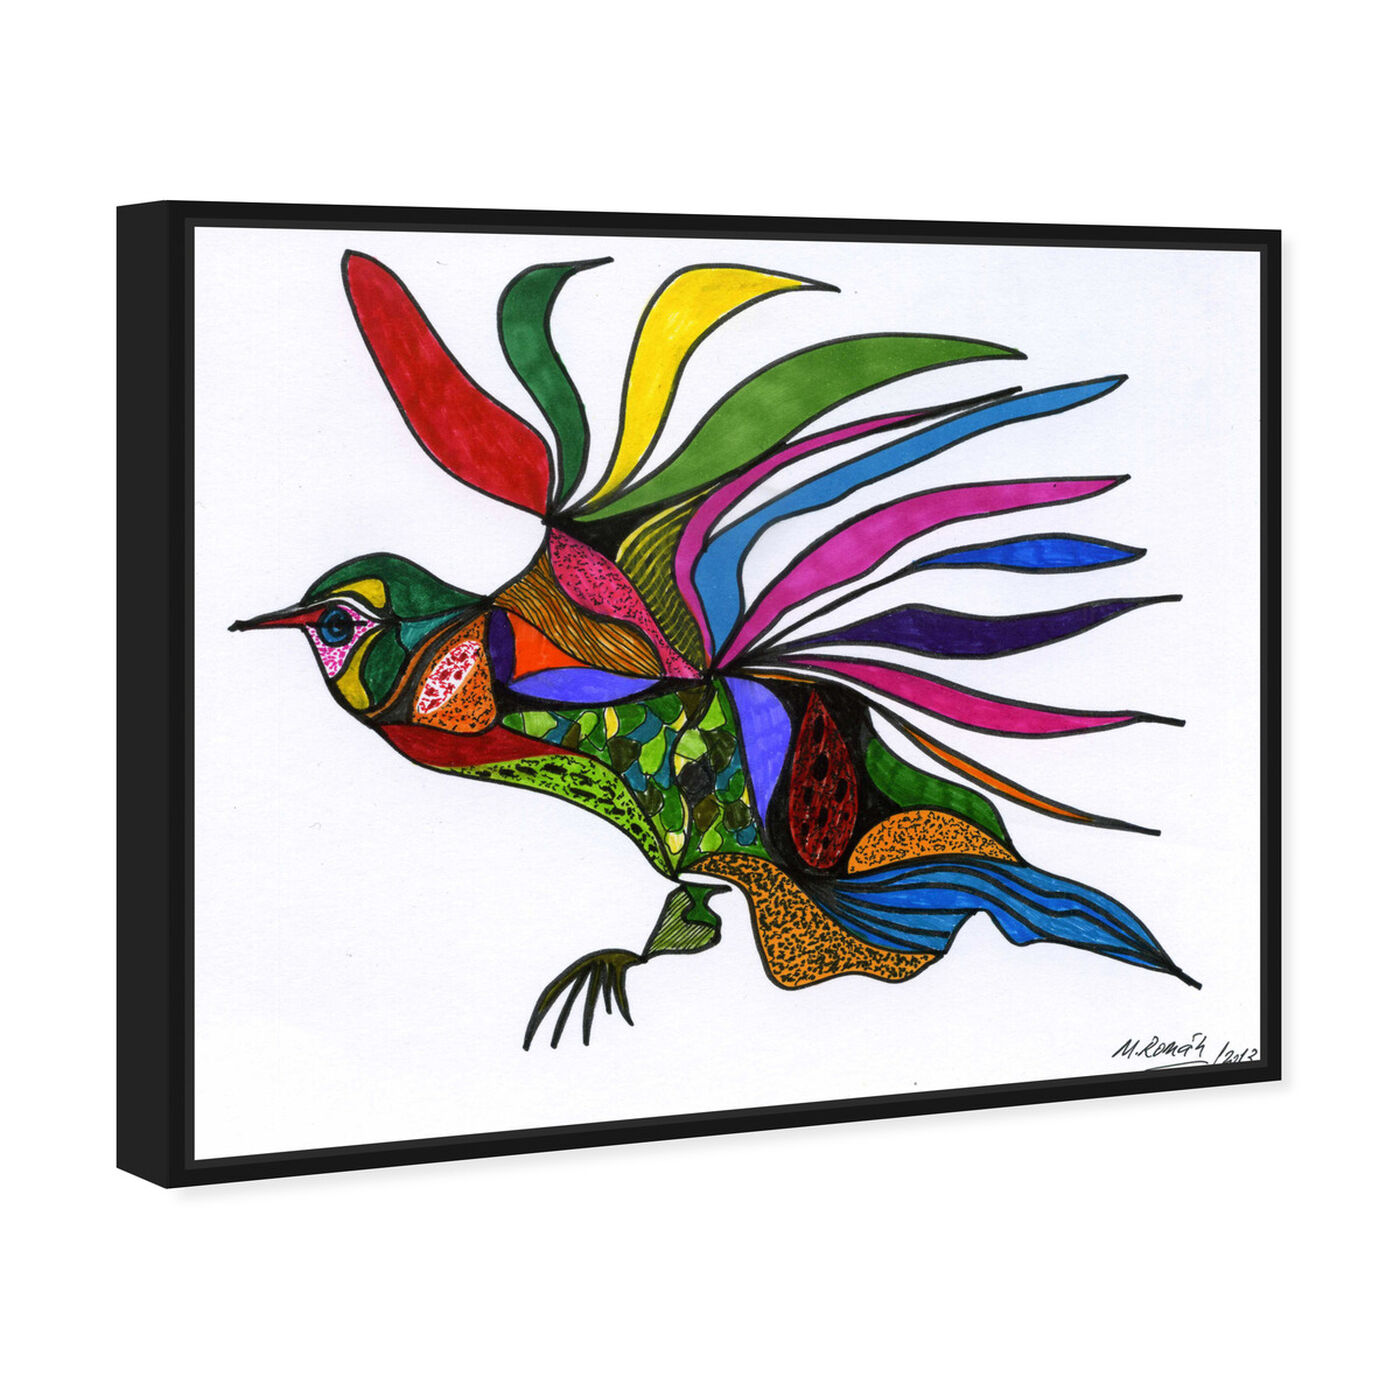 Angled view of Bird of Paradise featuring animals and birds art.